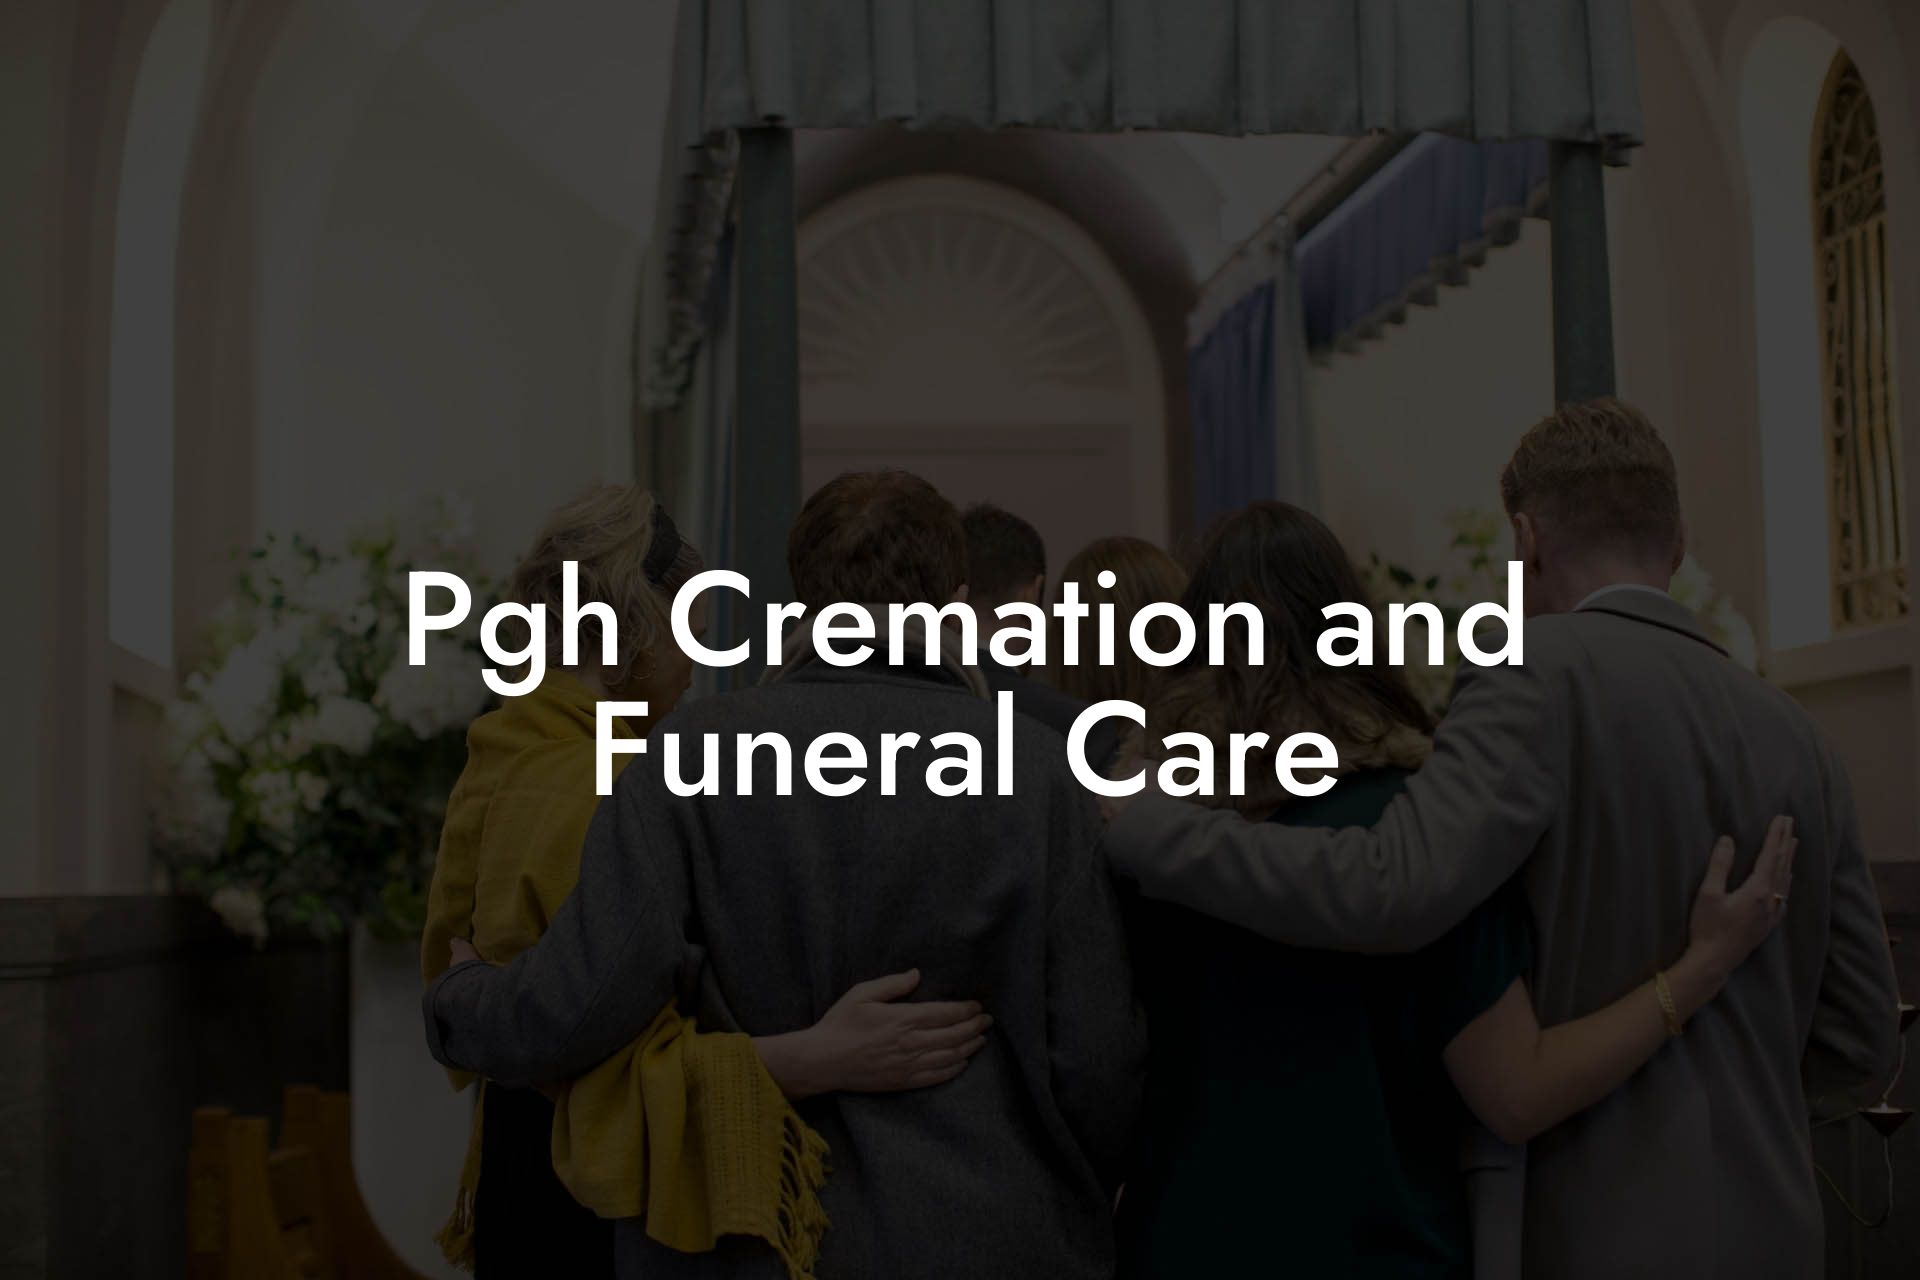 Pgh Cremation and Funeral Care